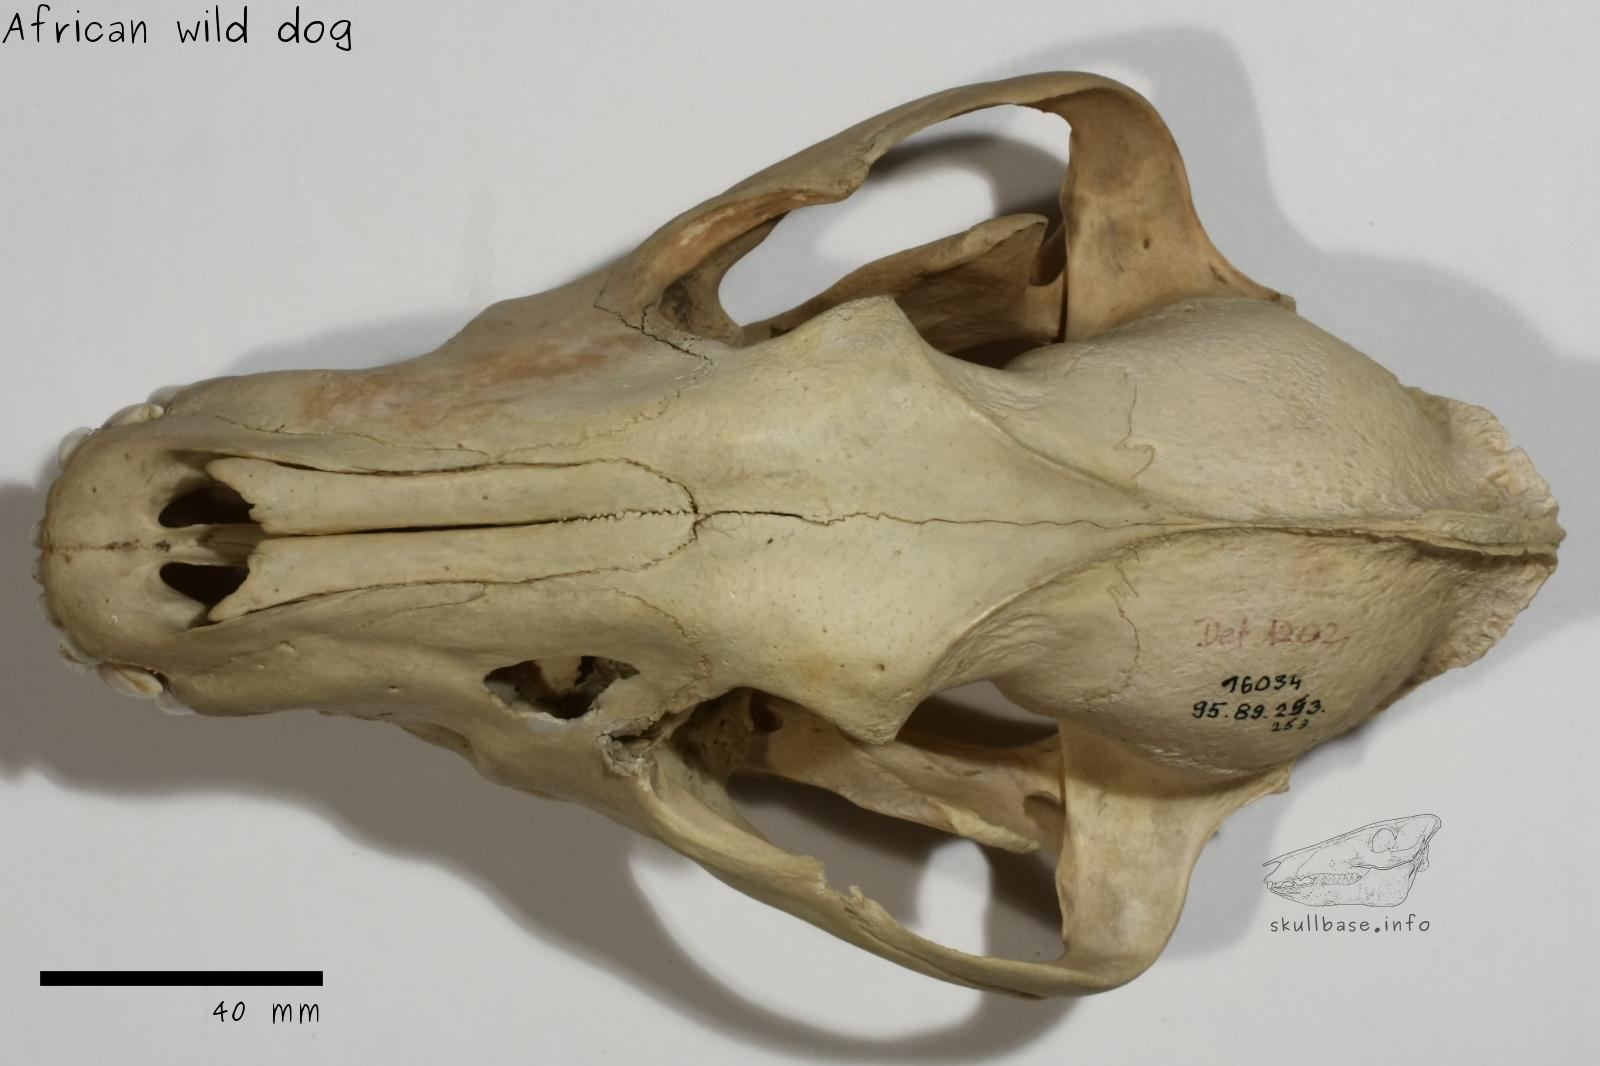 African wild dog (Lycaon pictus) skull dorsal view